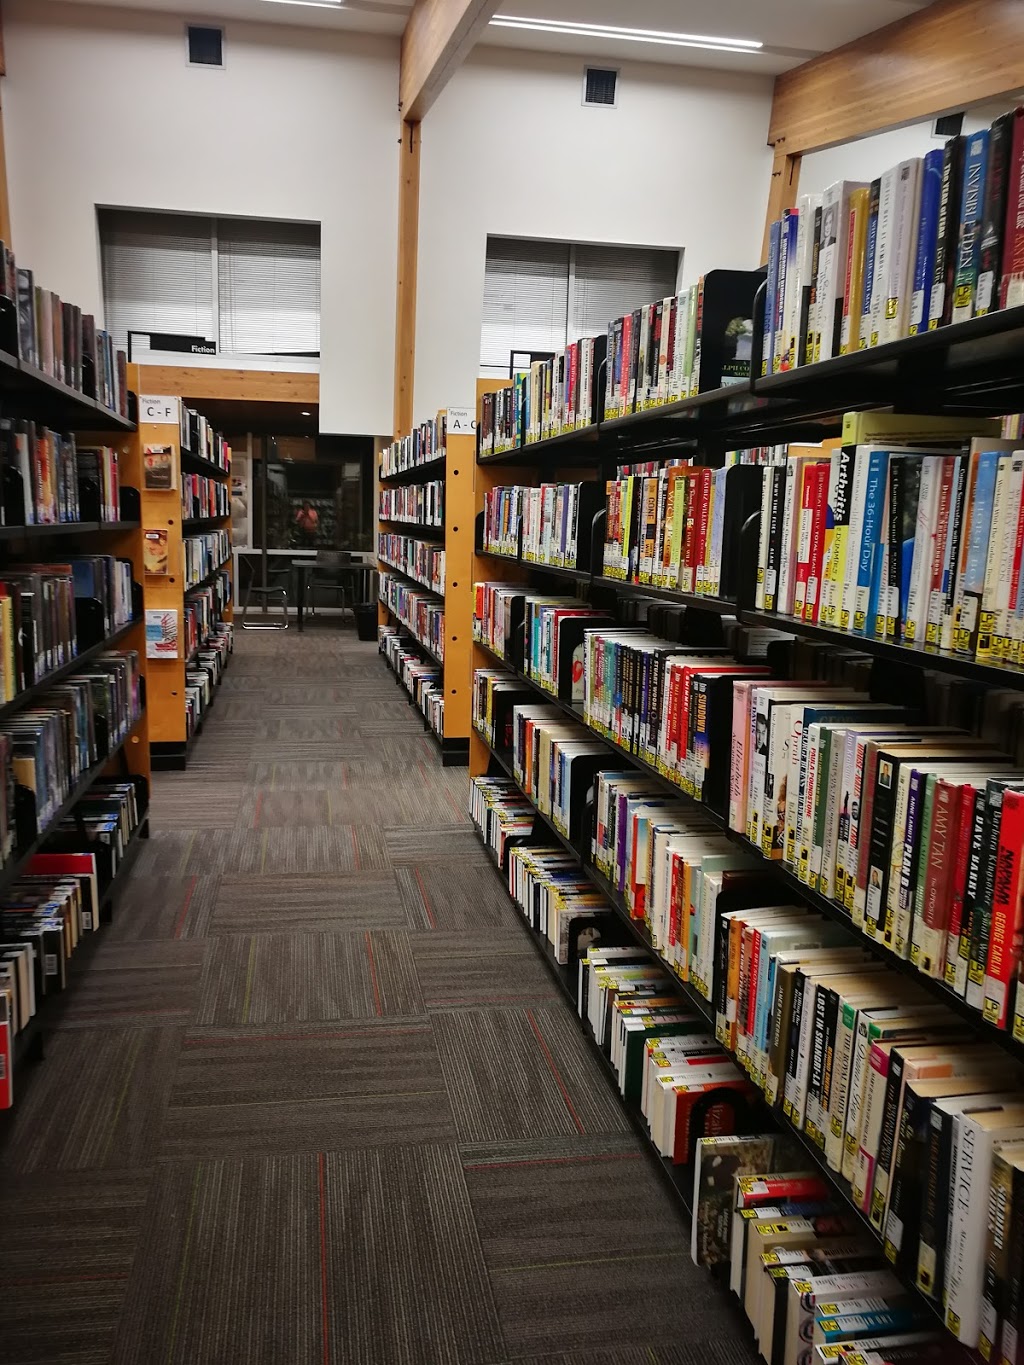 Surrey Libraries - Newton Library | library | 13795 70 Ave, Surrey, BC V3W 0E1, Canada | 6045987400 OR +1 604-598-7400